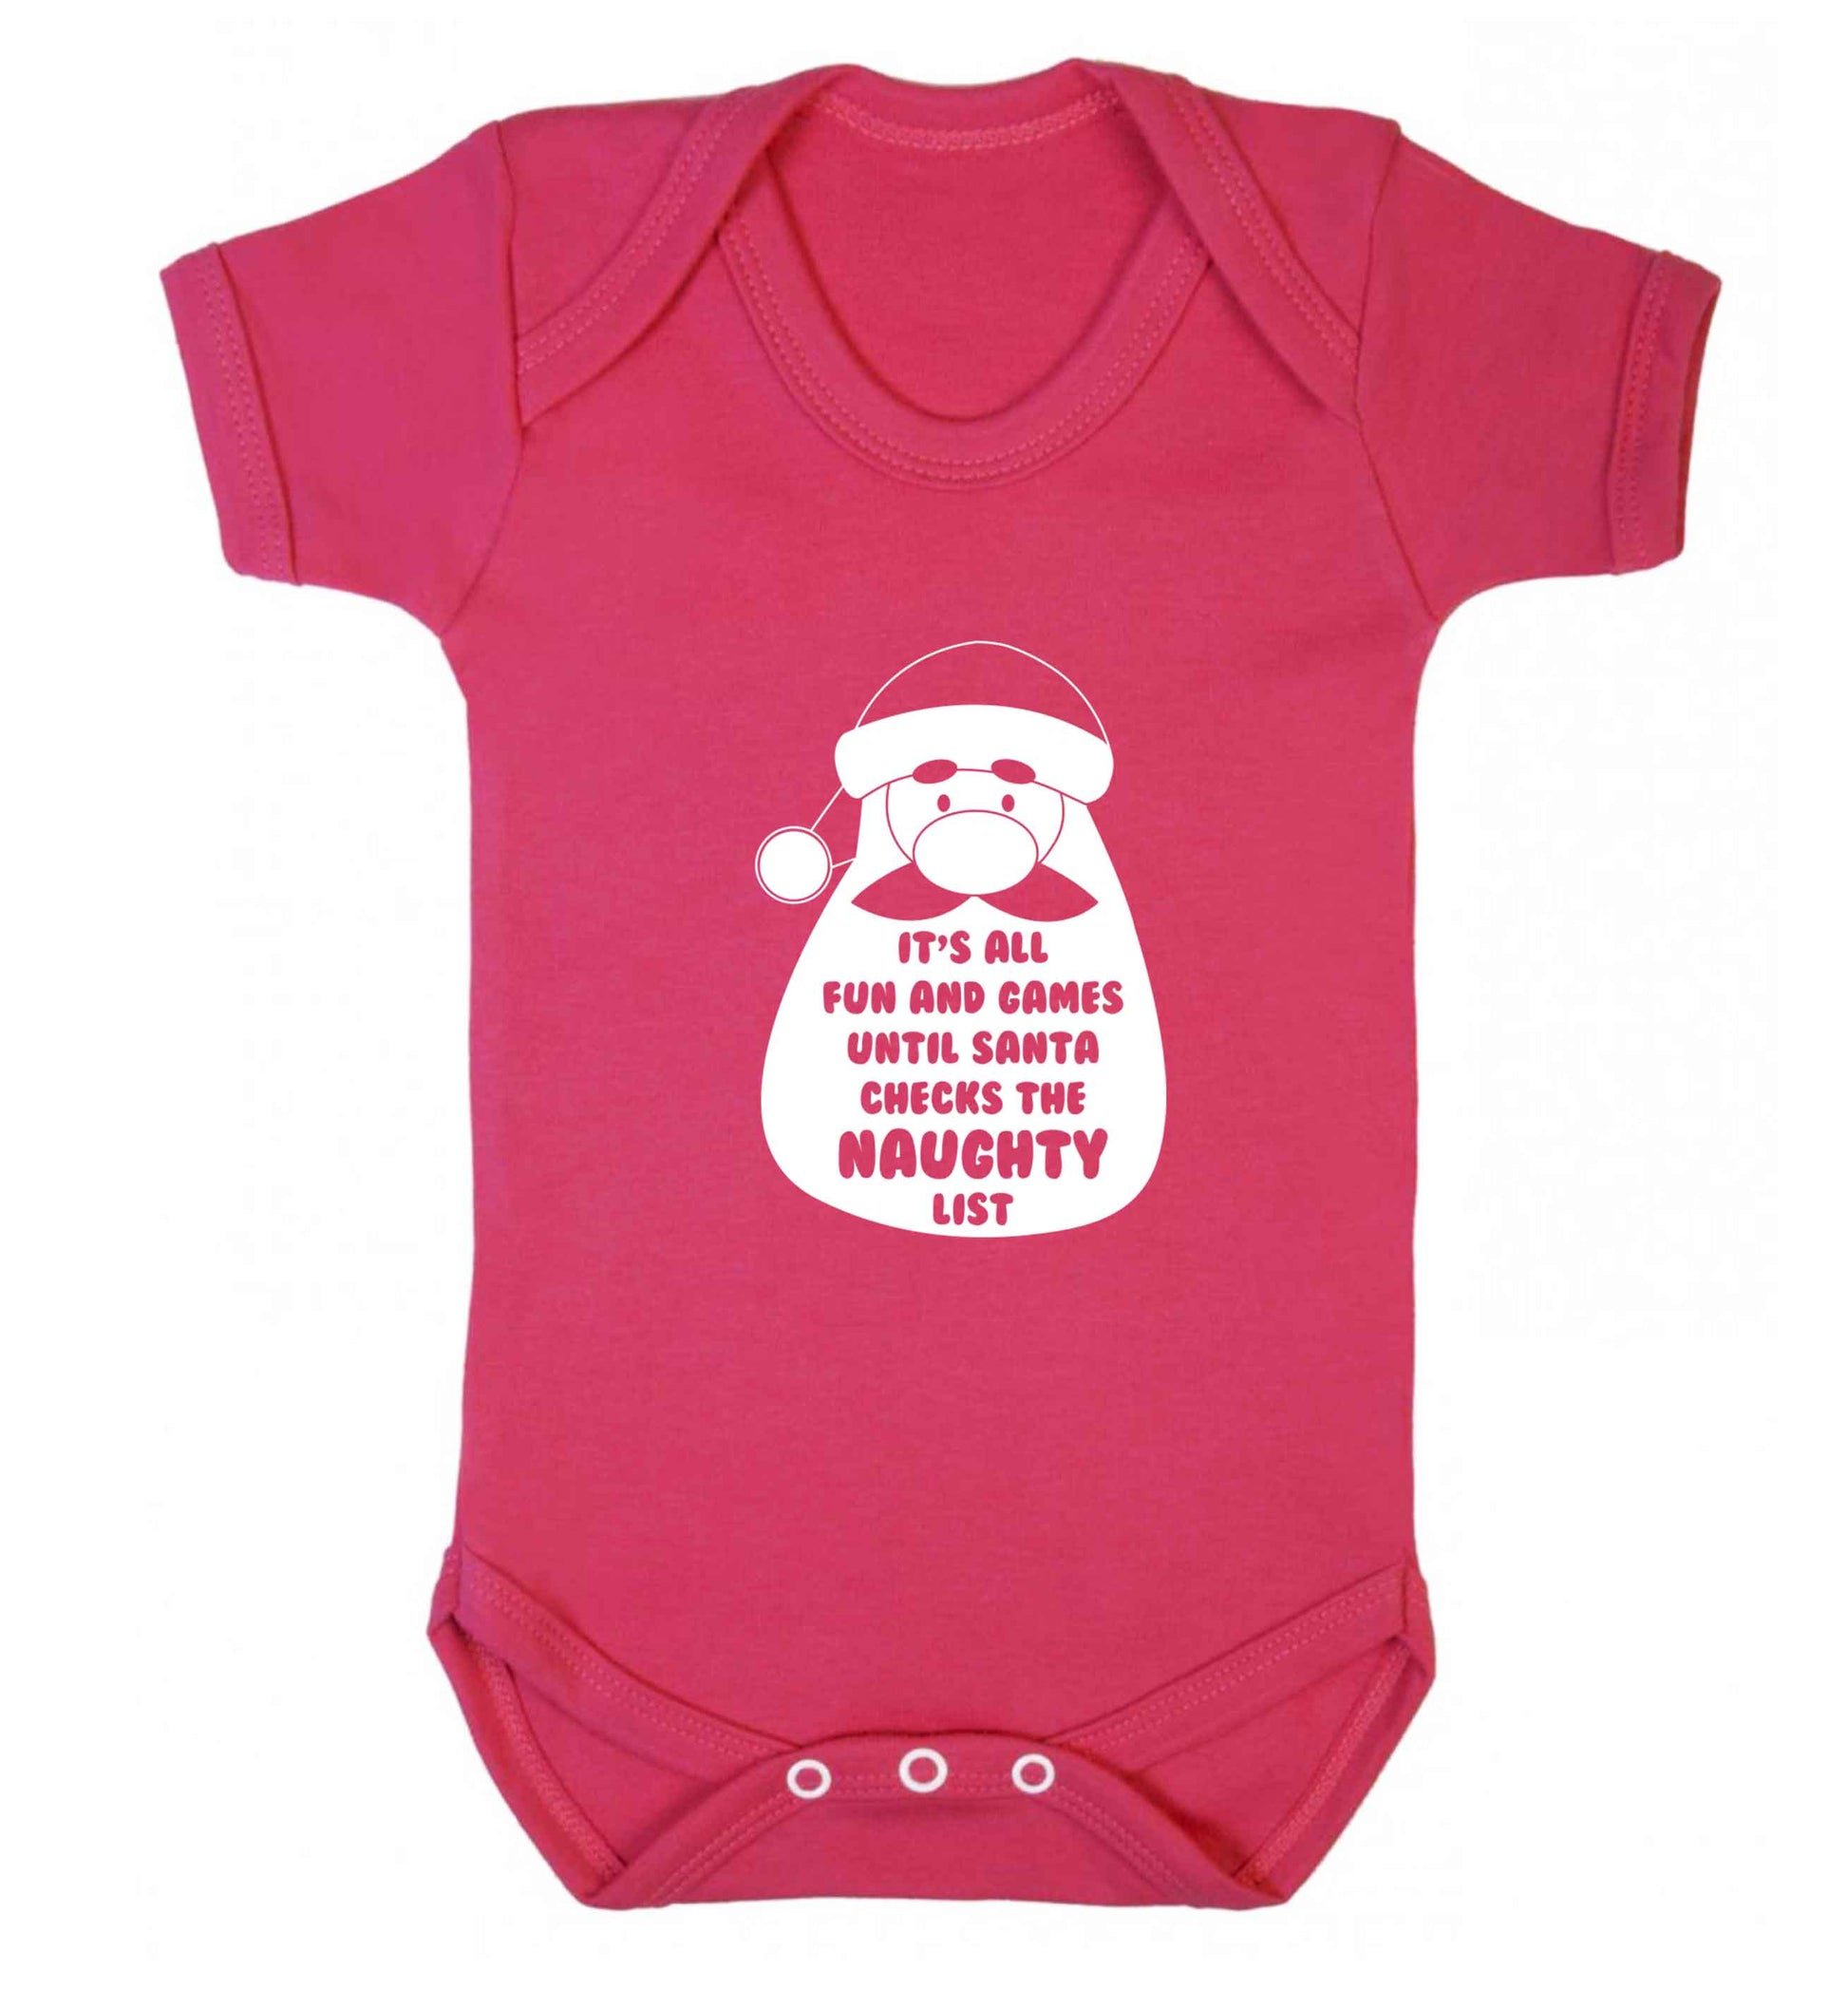 It's all fun and games until Santa checks the naughty list baby vest dark pink 18-24 months